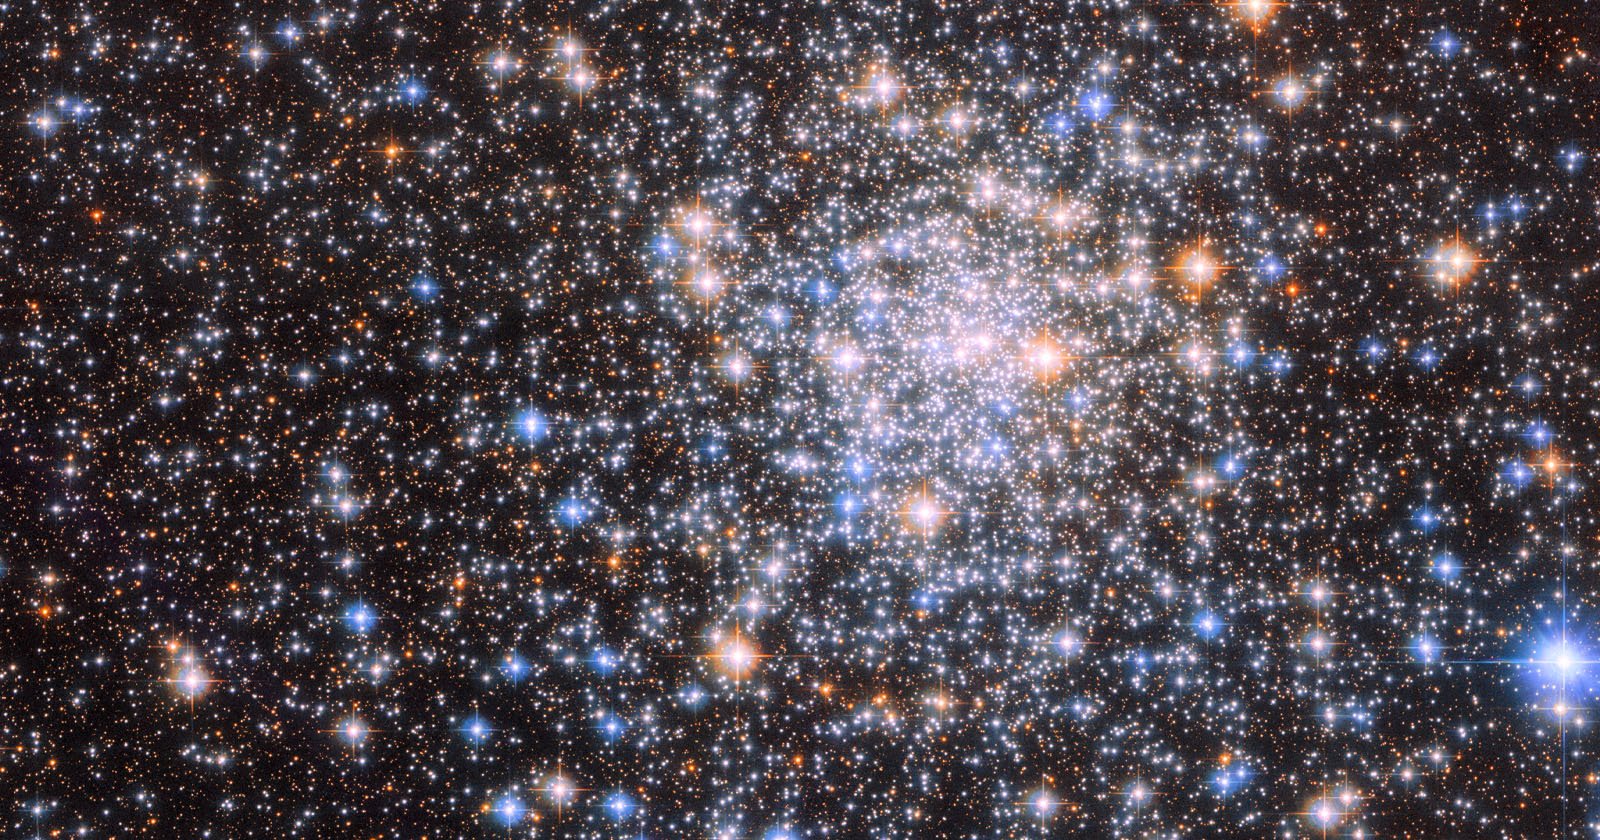 Hubbles New High-Res Star Cluster Photo is Your Next Desktop Background